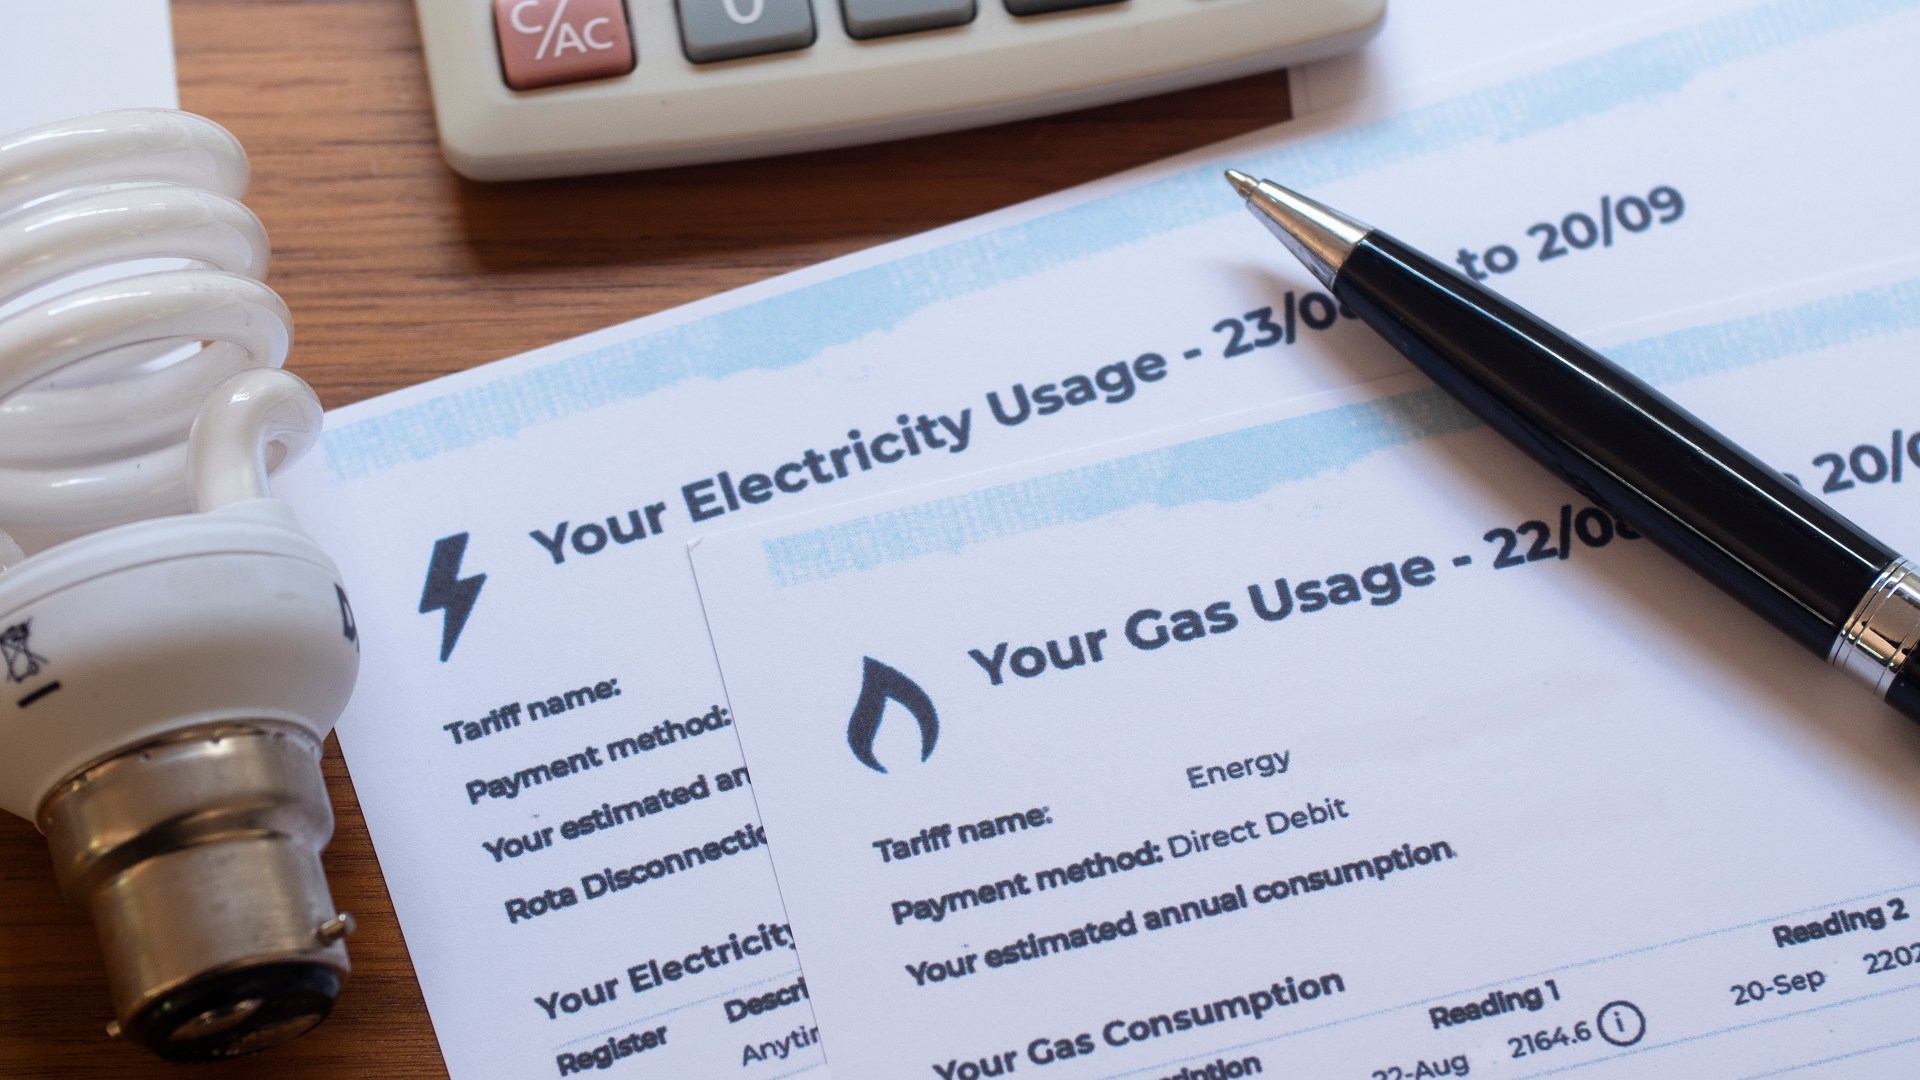 Hard-pressed Brits ‘must be helped with bills by lowering gas electric standing charges costing around 300 a year’ [Video]